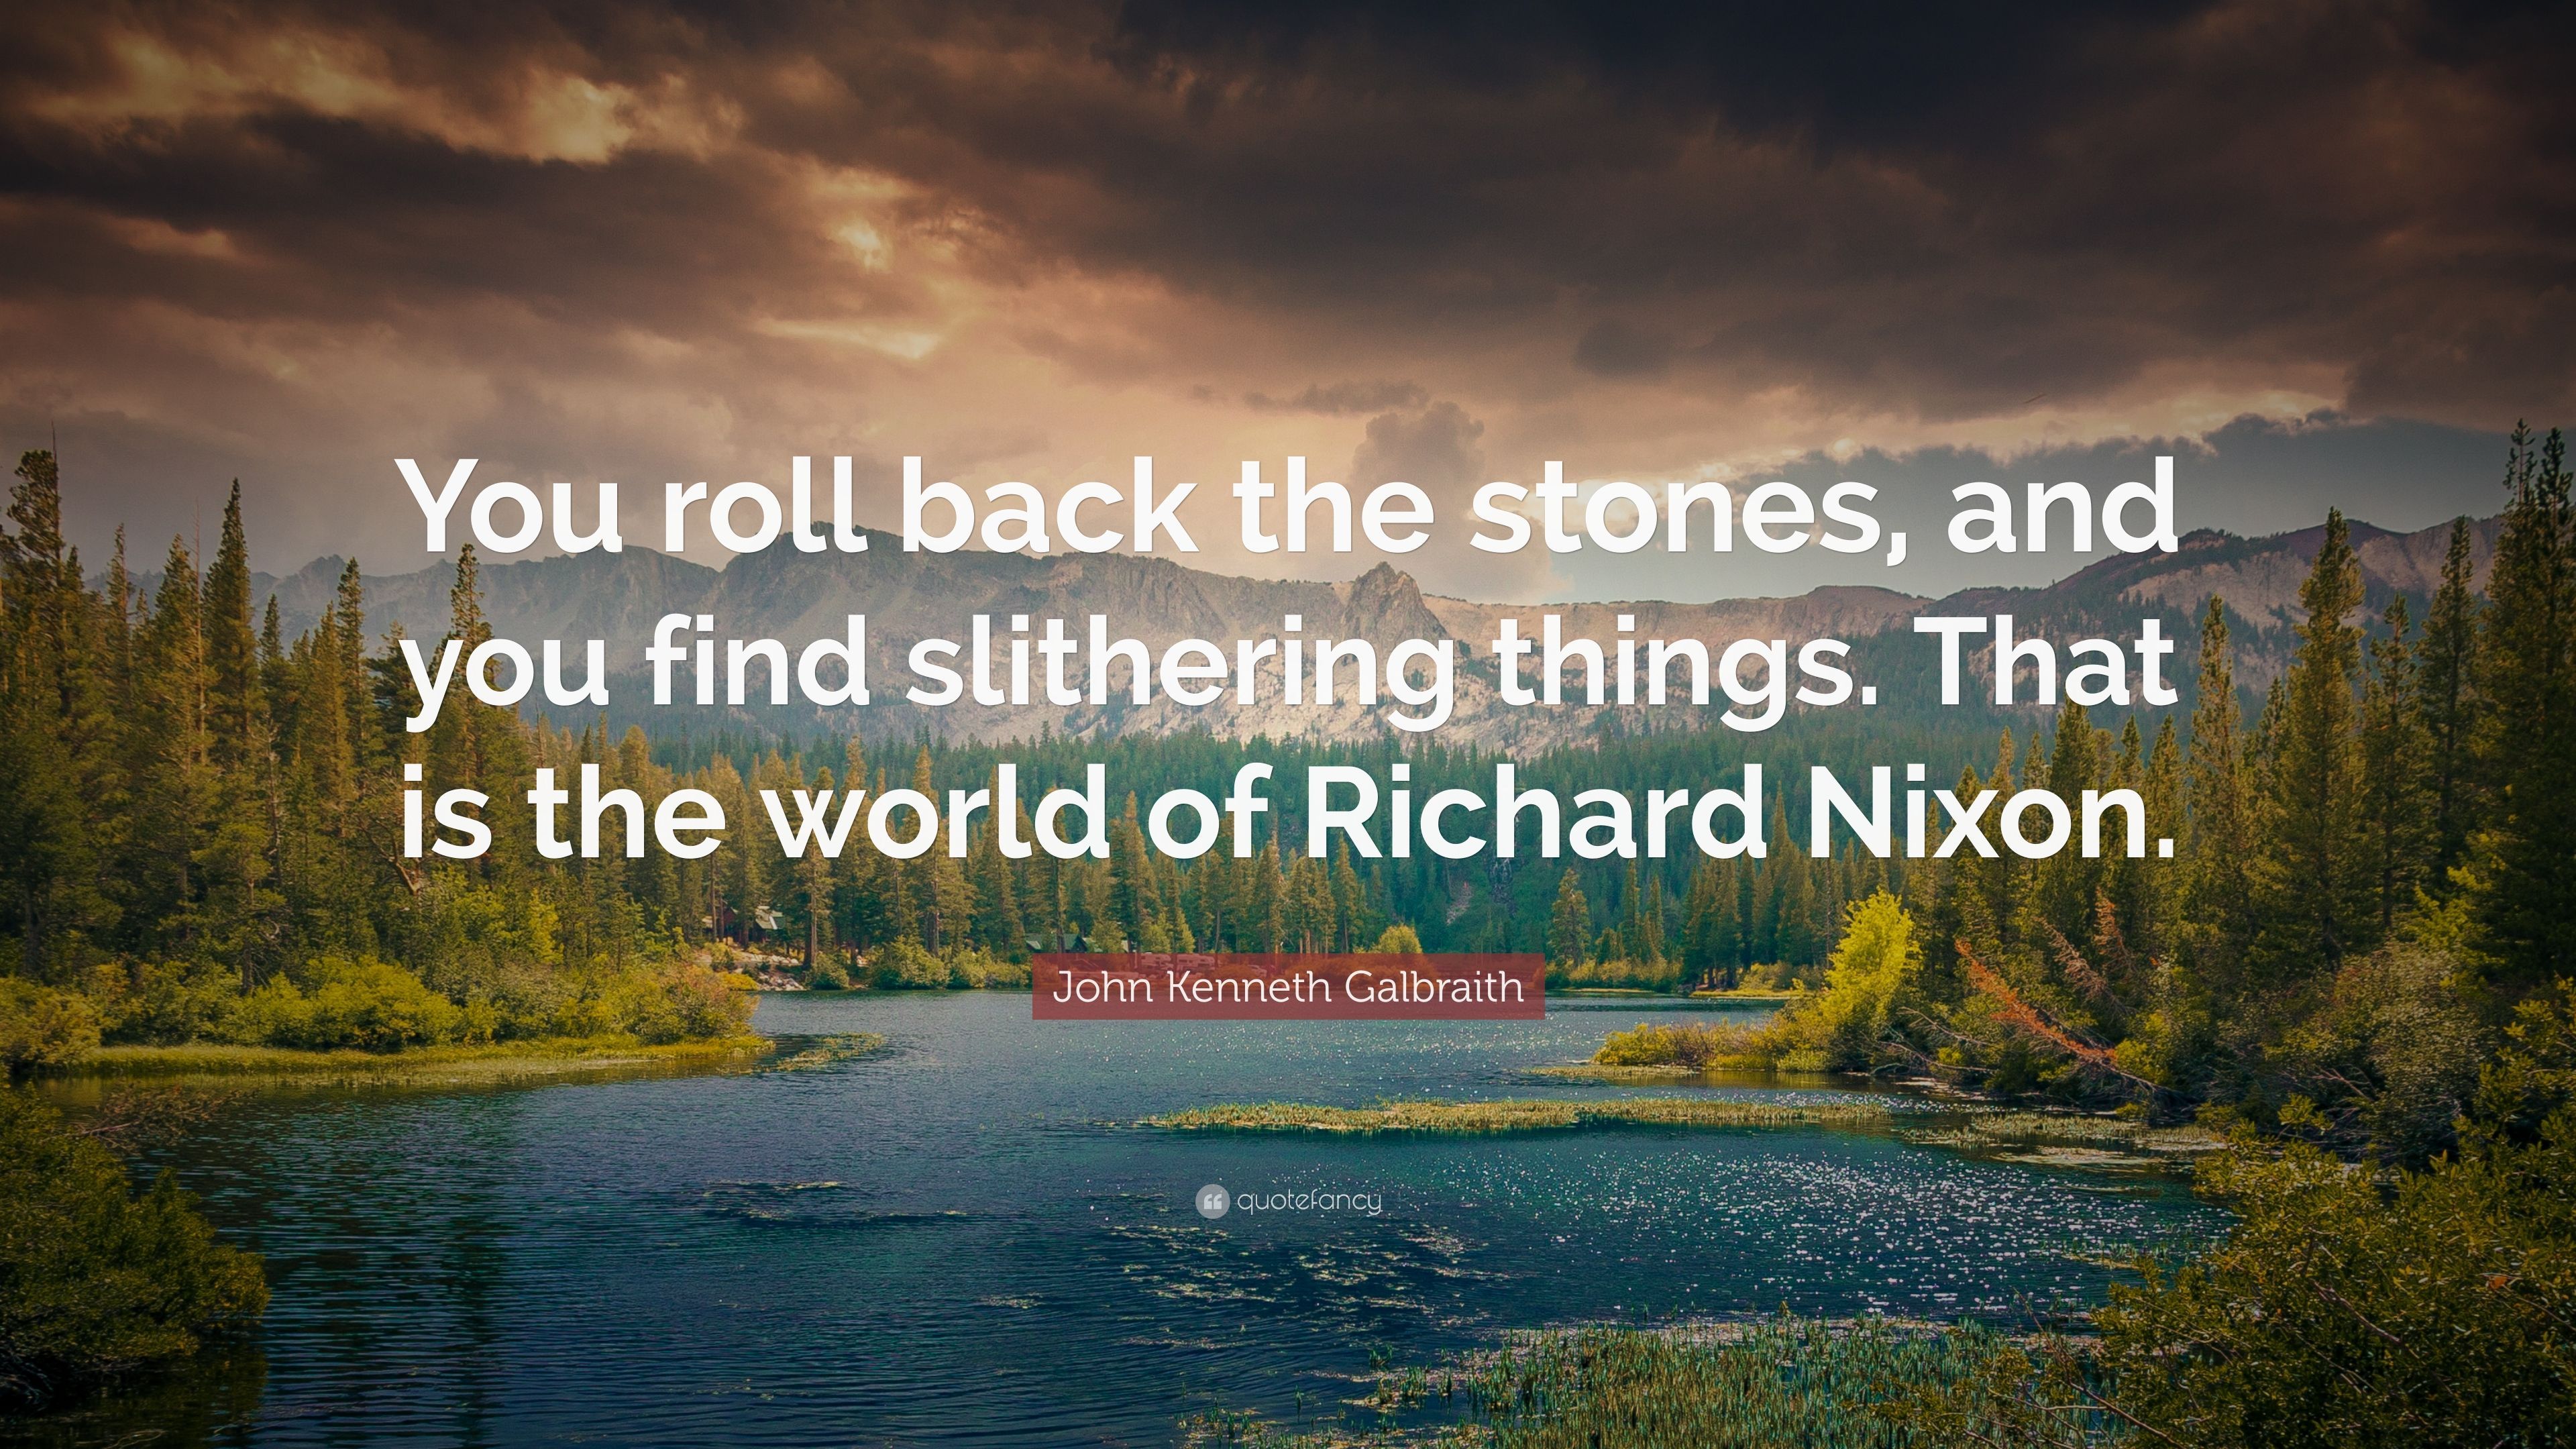 John Kenneth Galbraith Quote: “You roll back the stones, and you find slithering things. That is the world of Richard Nixon.” (7 wallpaper)